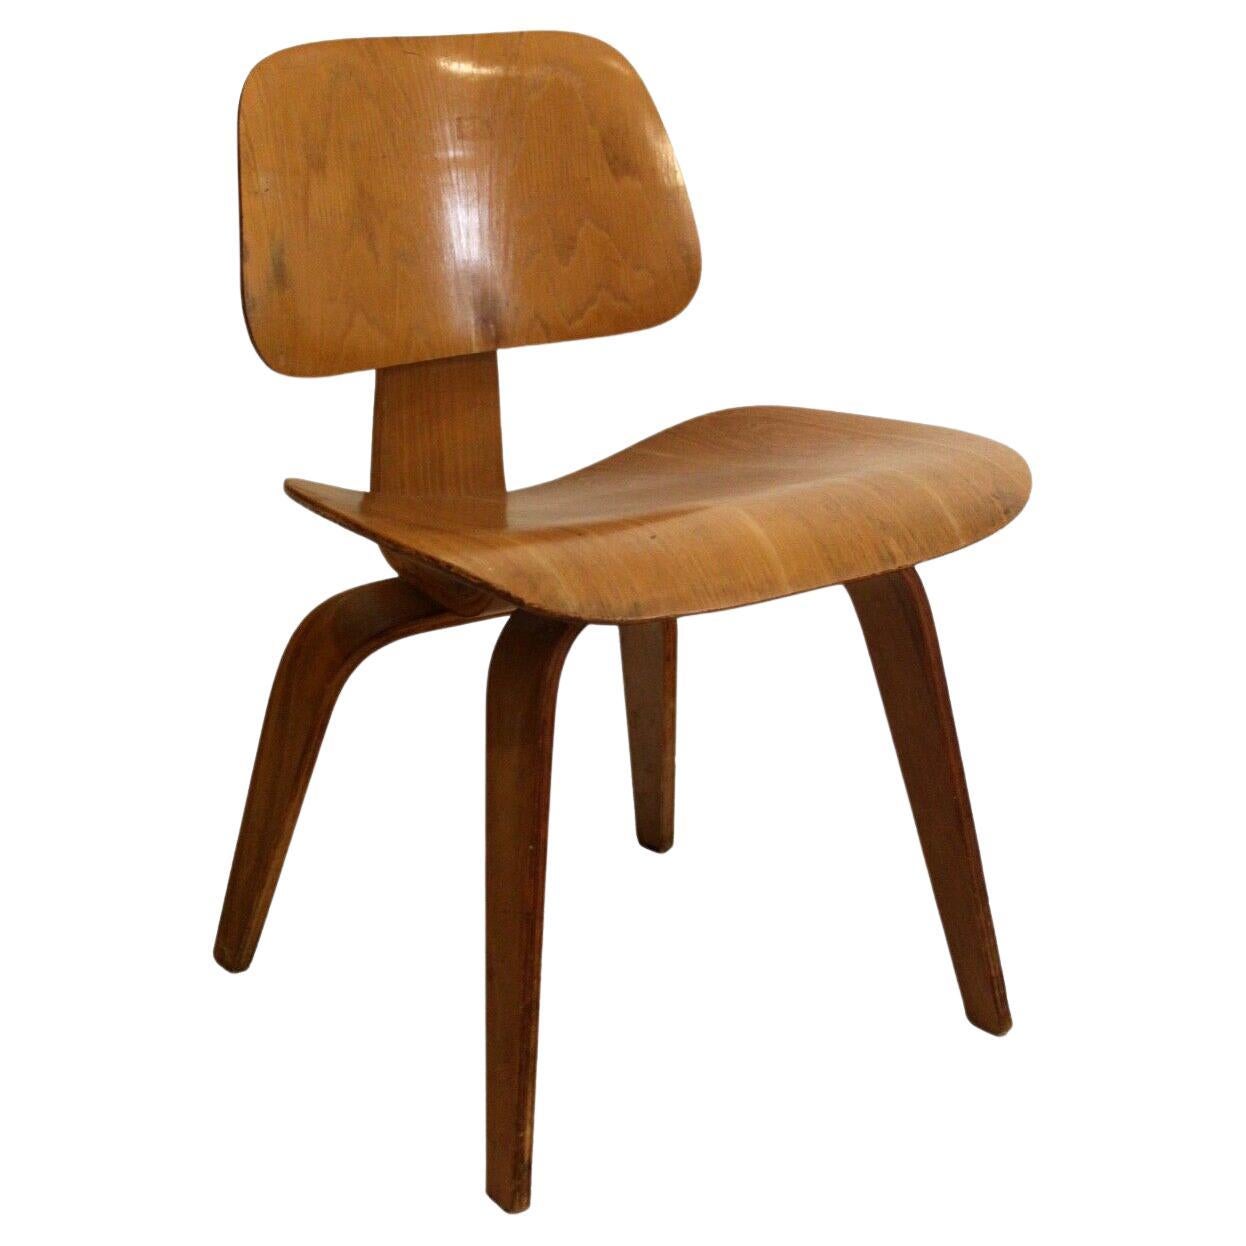 Mid-Century Modern Rare Maple Eames DCW Molded Dining Side Chair 1940s Evans